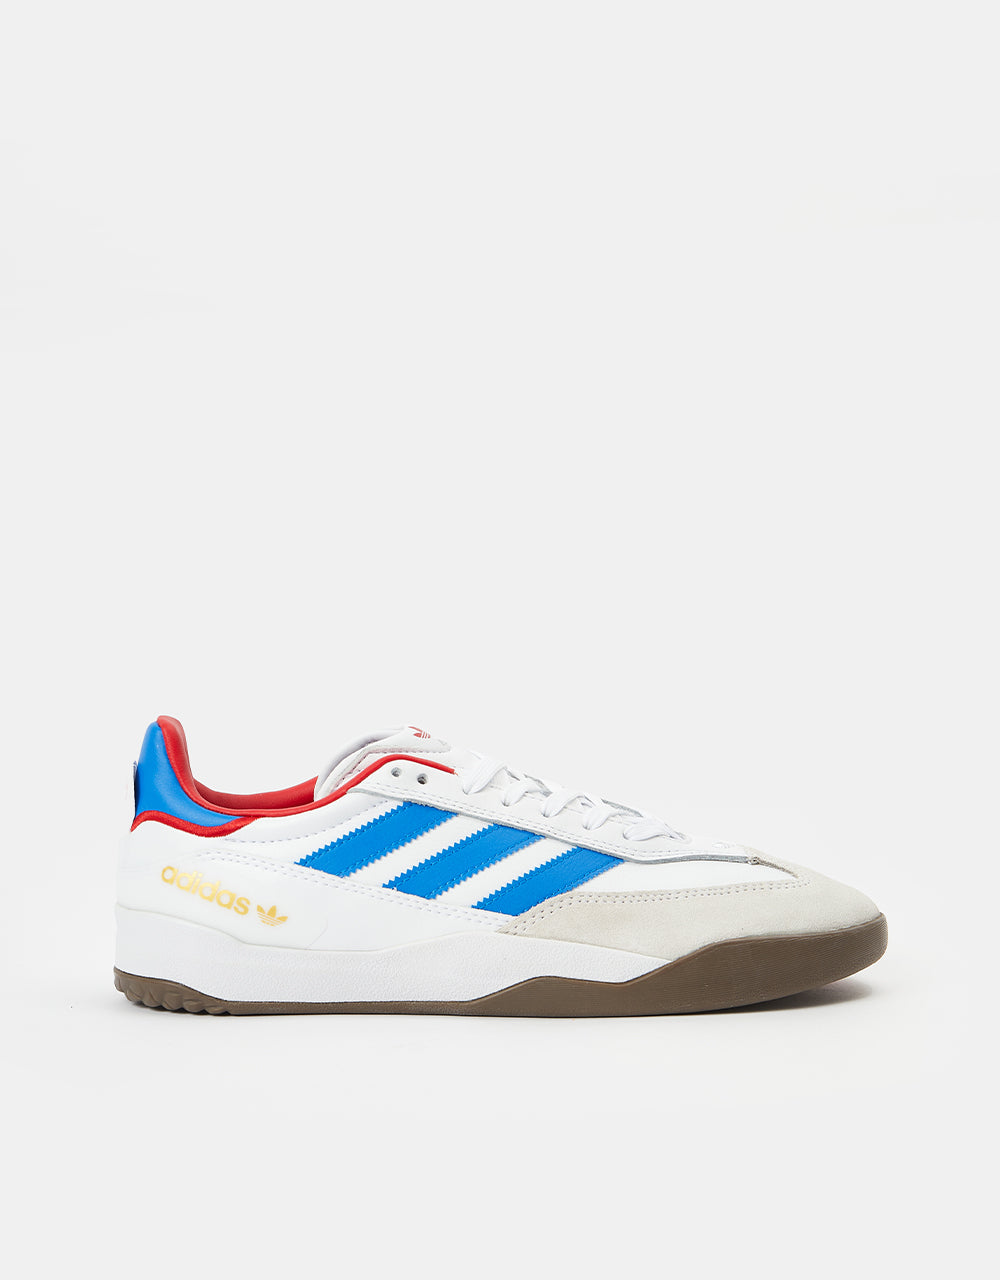 adidas Copa Nationale Skate Shoes - White/Bluebird/Scarlet – Route One